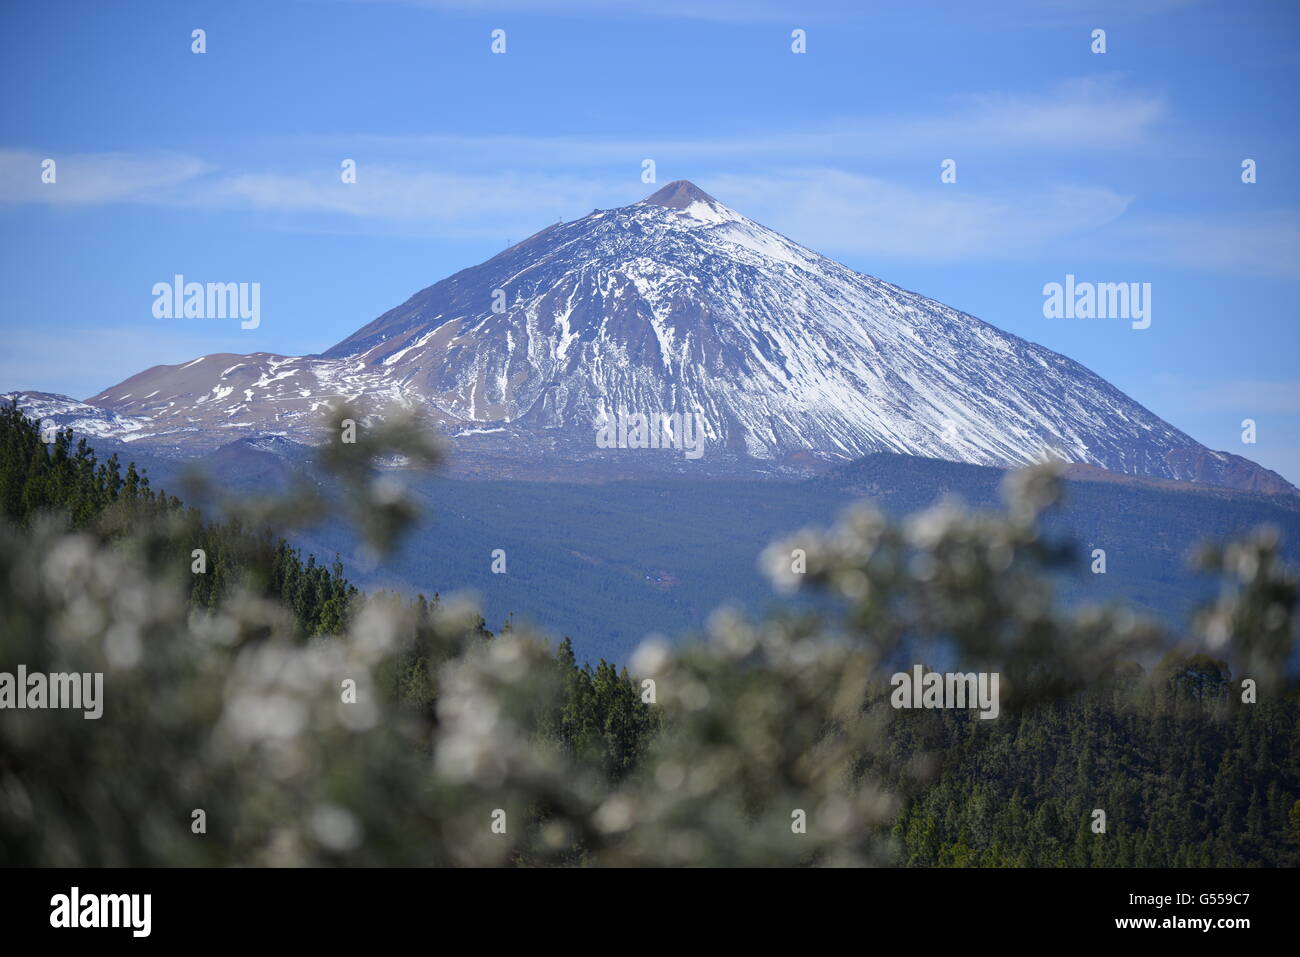 Canary Island pine forest and snow on Mount Teide, Tenerife. Stock Photo